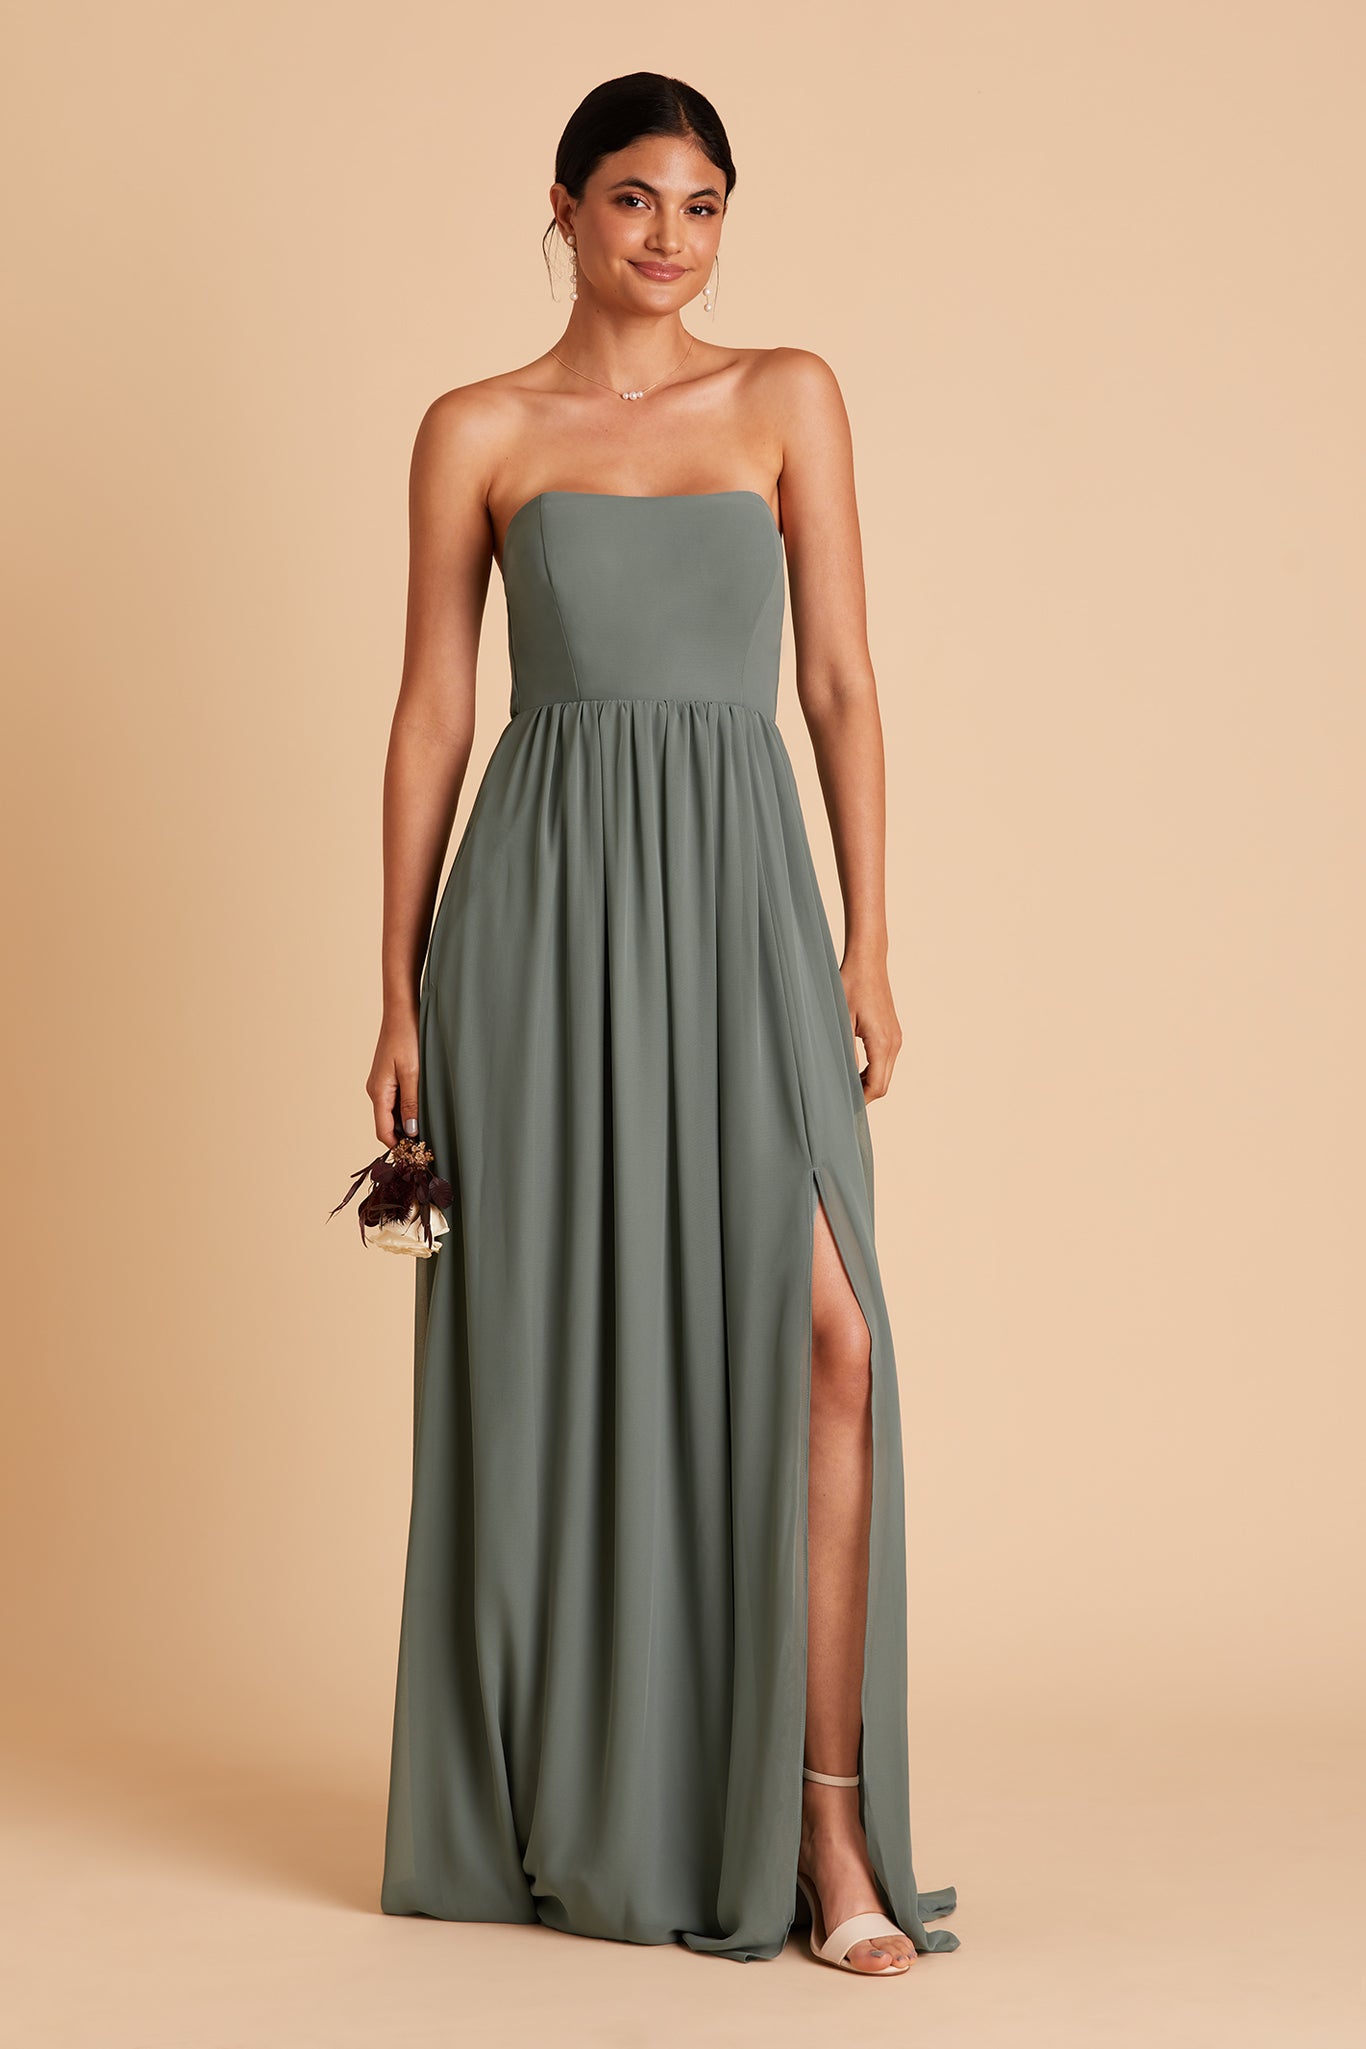 August bridesmaid dress with slit in sea glass chiffon by Birdy Grey, front view